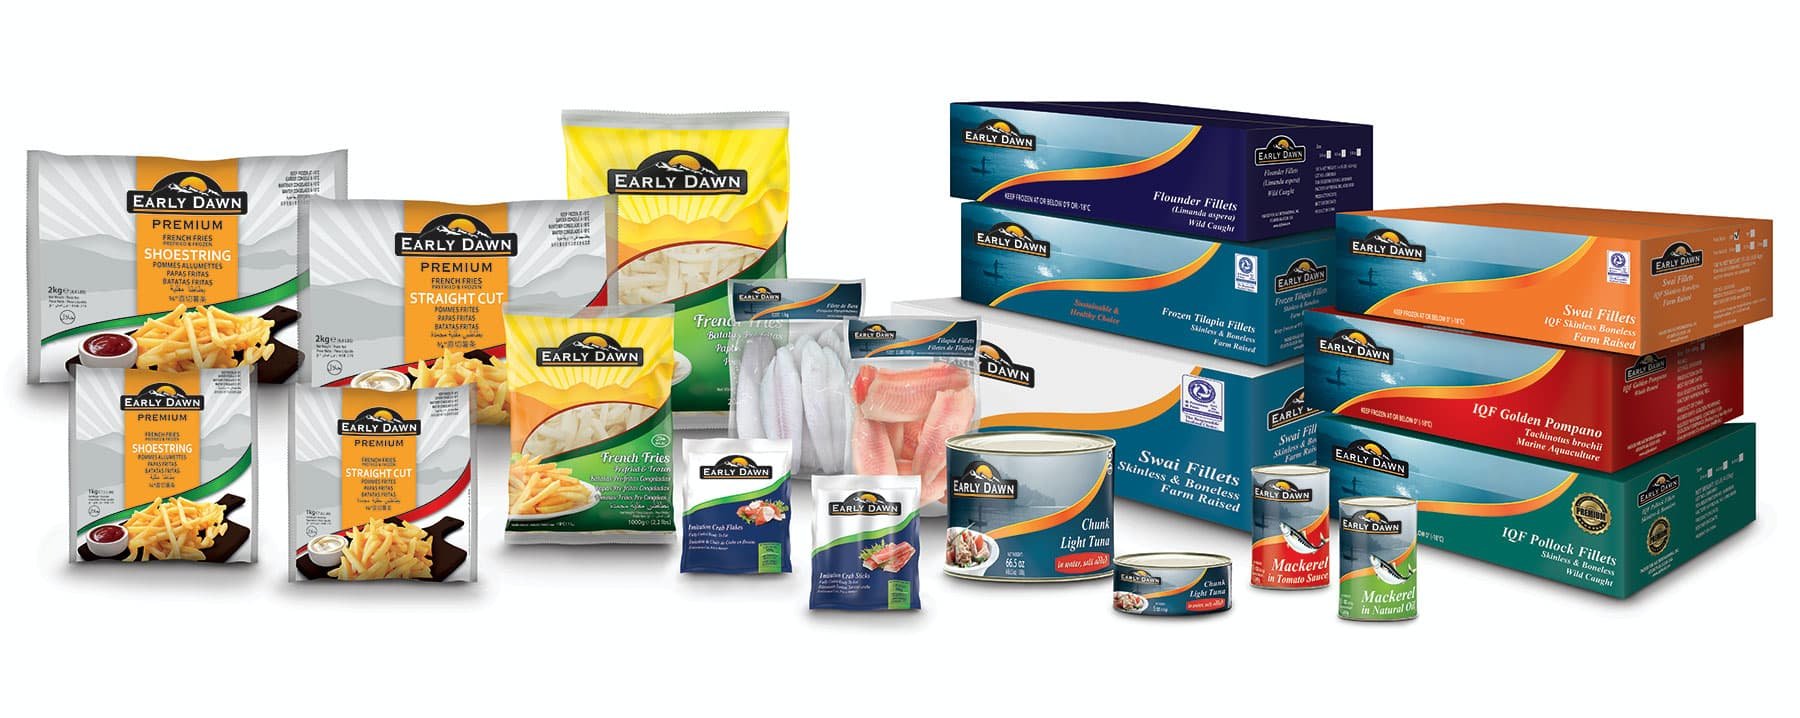 Early Dawn packages of products: bags of french fries and cod fillets, cans of tuna and mackerel, boxes of flounder, tilapia, golden pompano and pollock fillets